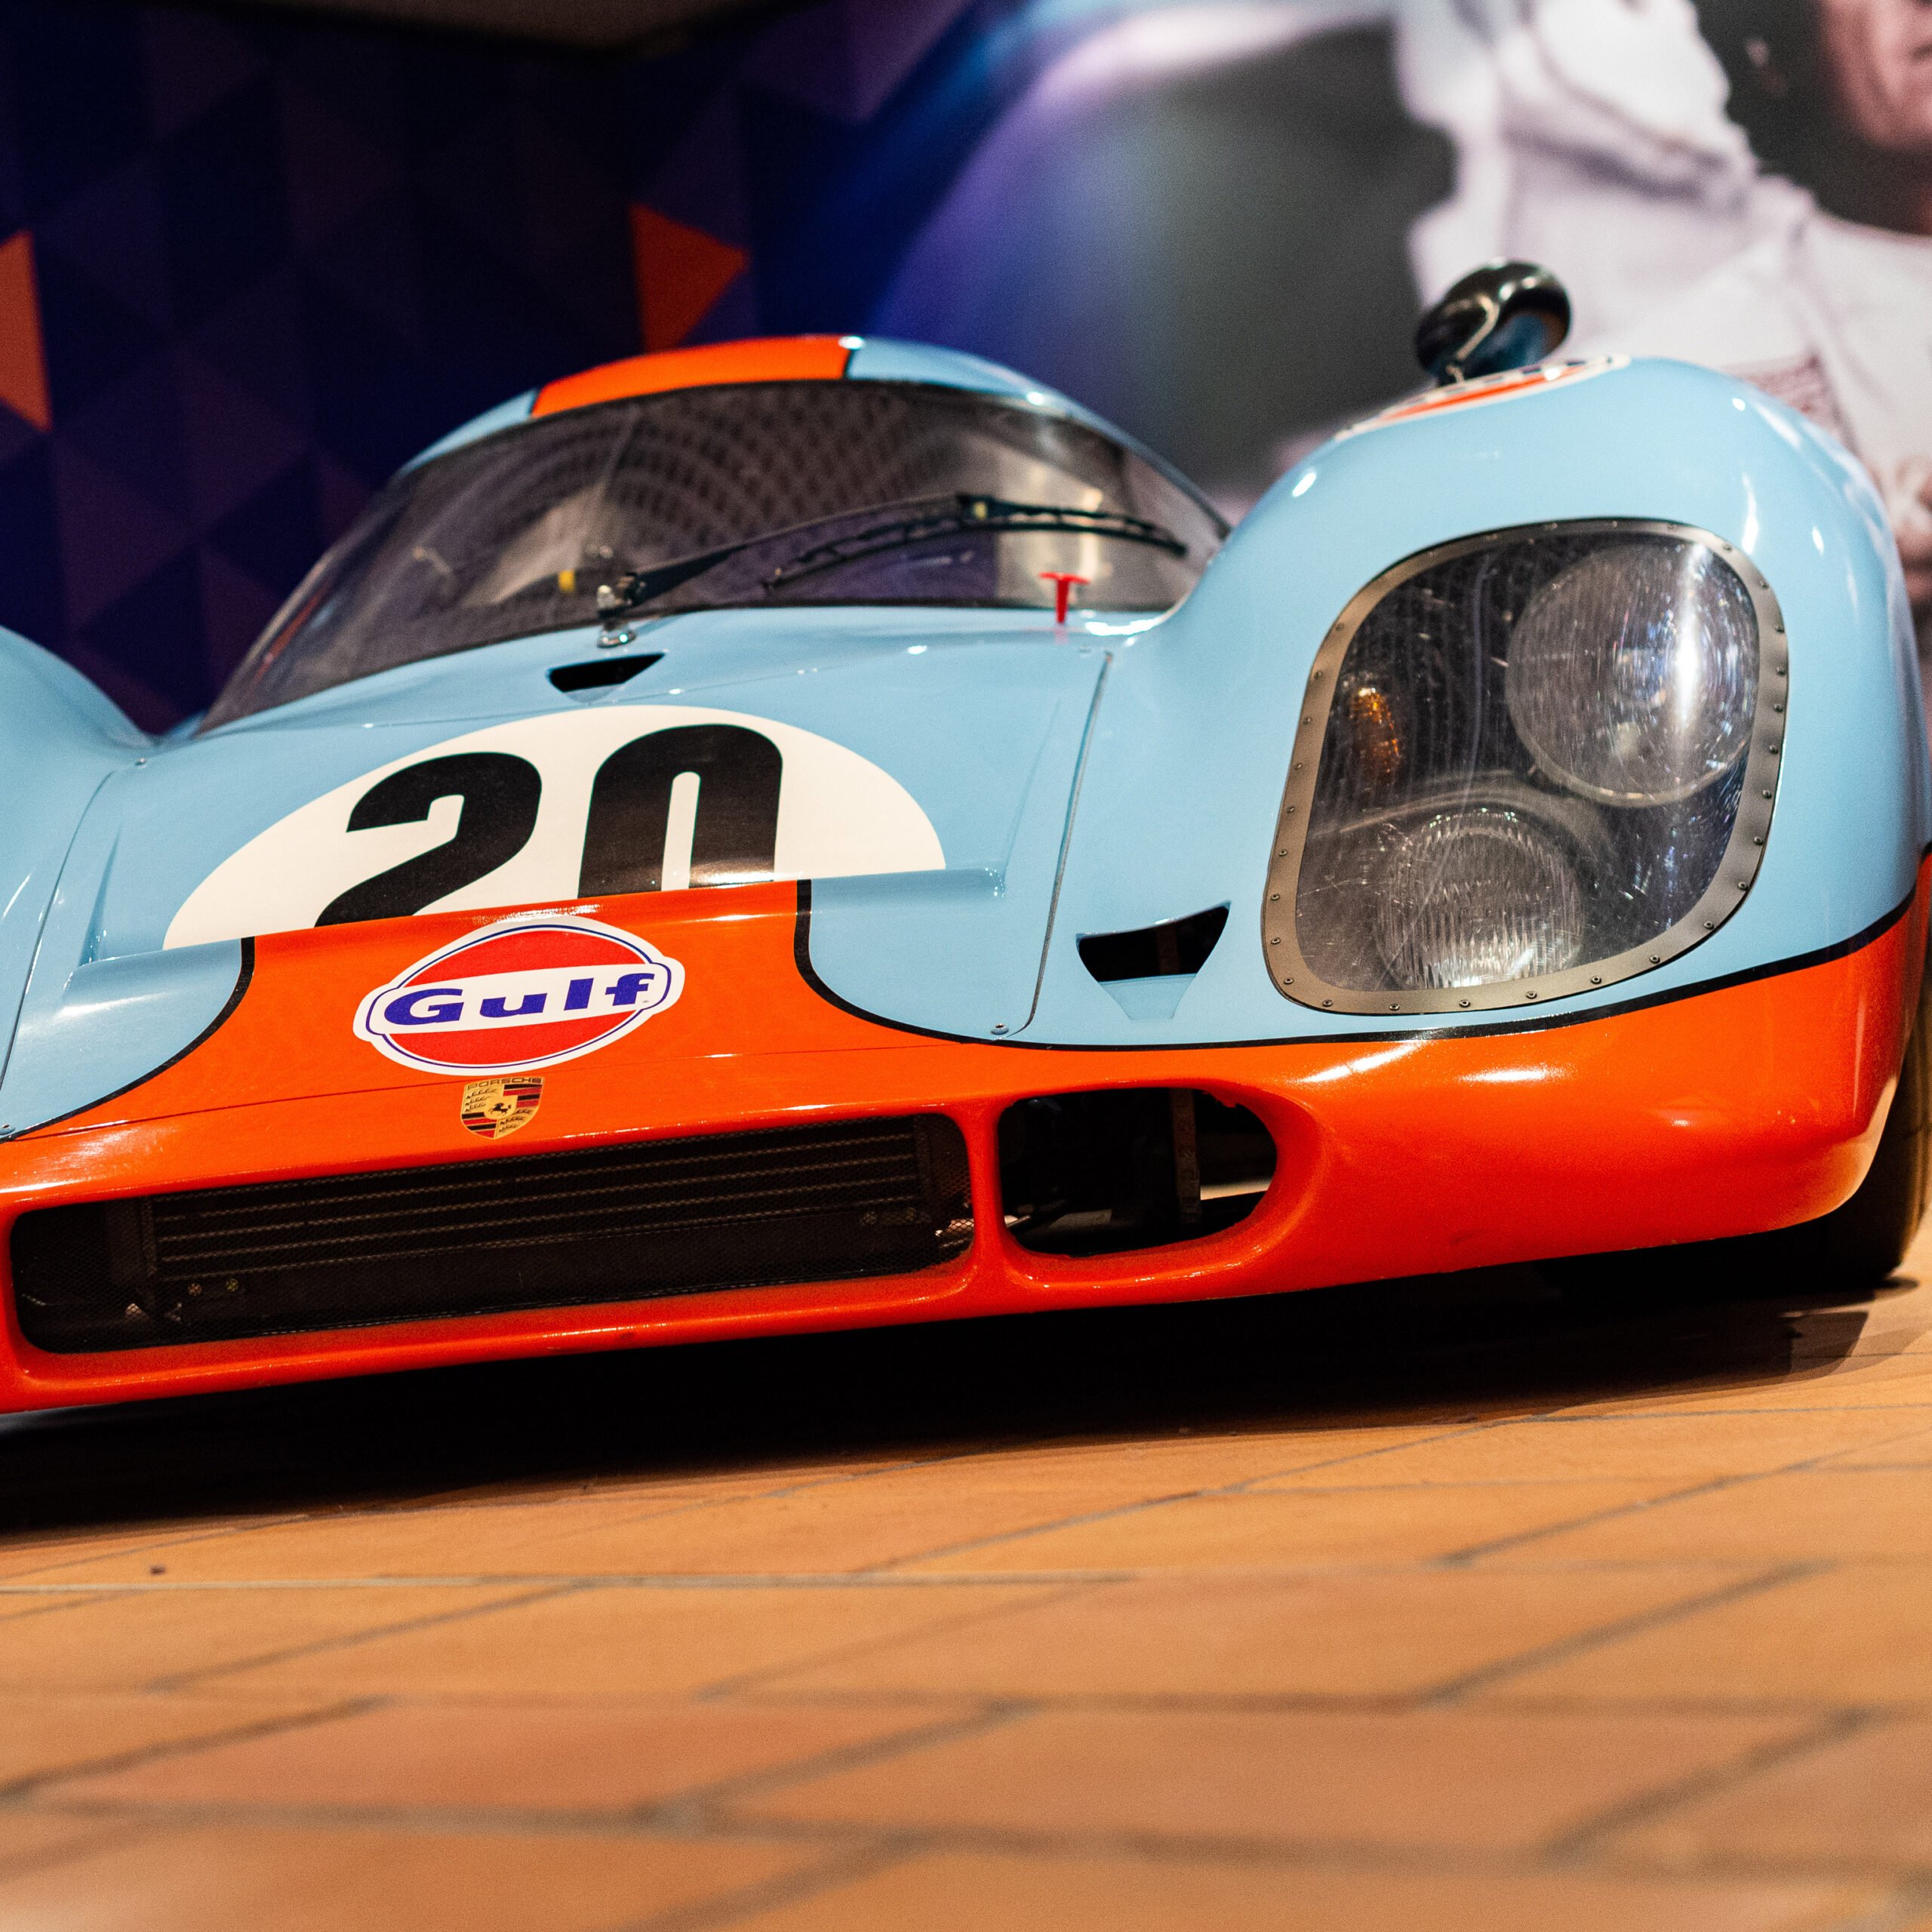 Iconic and rare Race car Porsche 917 Gulf From Steve Mc Queen at